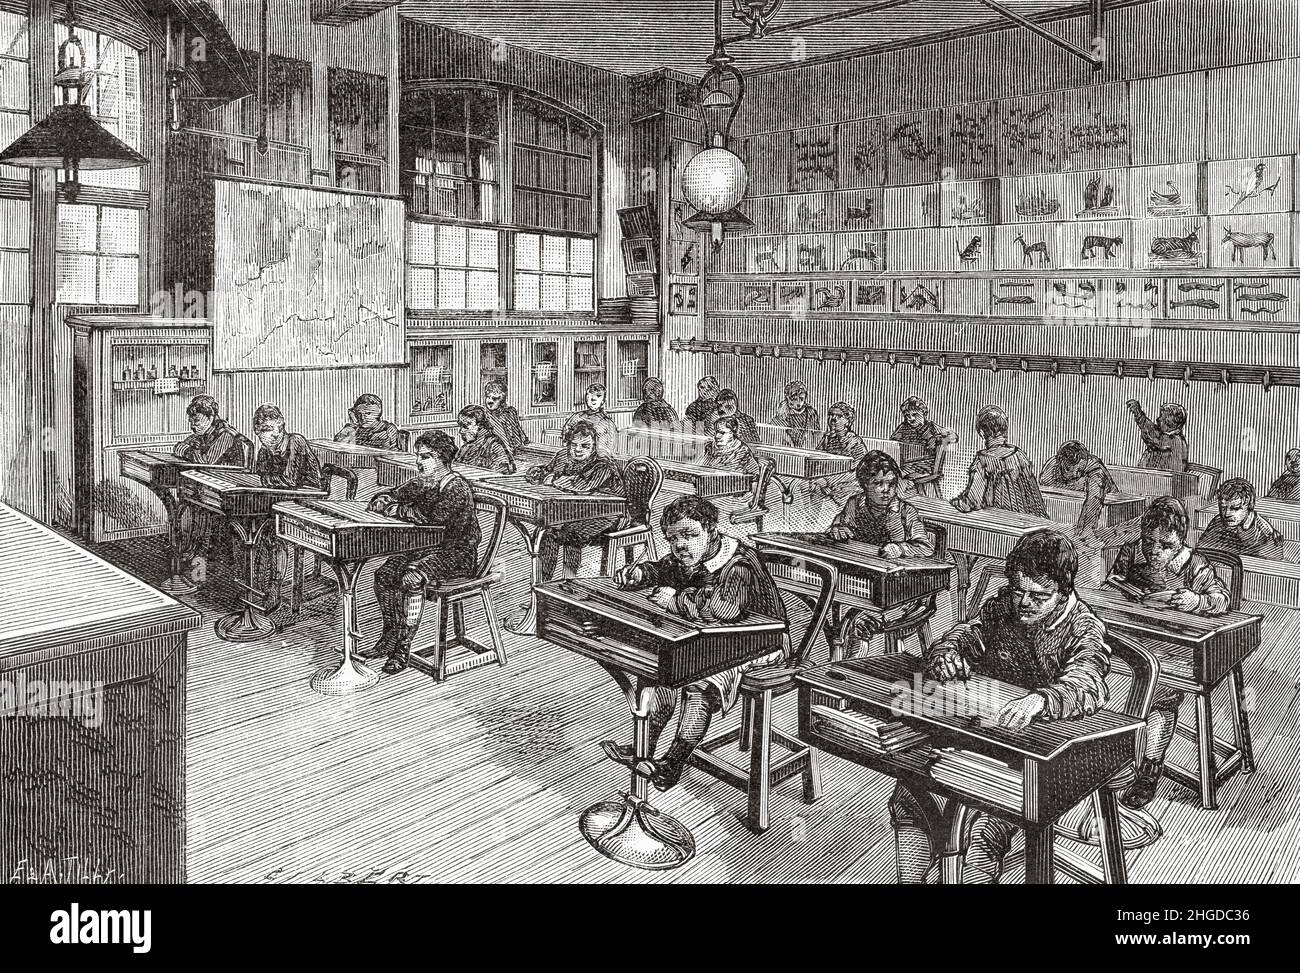 Monge school, Paris, France. Ecole Monge was founded in Paris in 1871, France. Europe. Old 19th century engraved illustration from La Nature 1884 Stock Photo